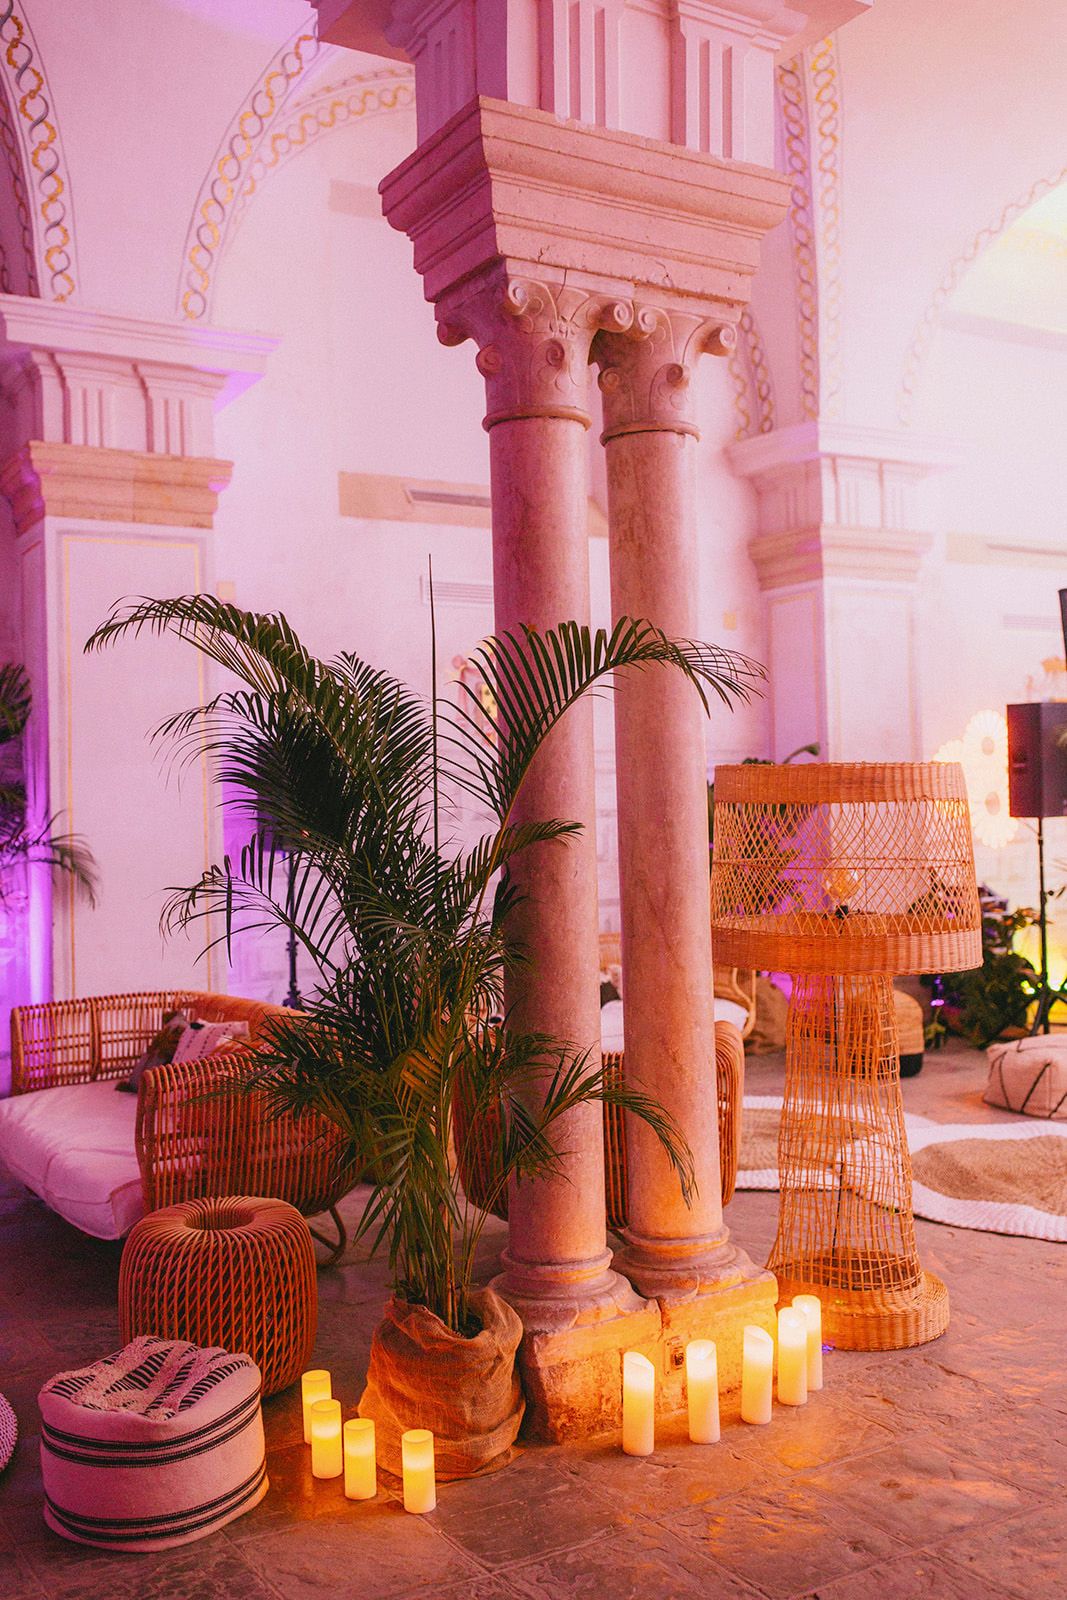 Lounge area with candles at Andalusian-Moorish party in Seville Spain